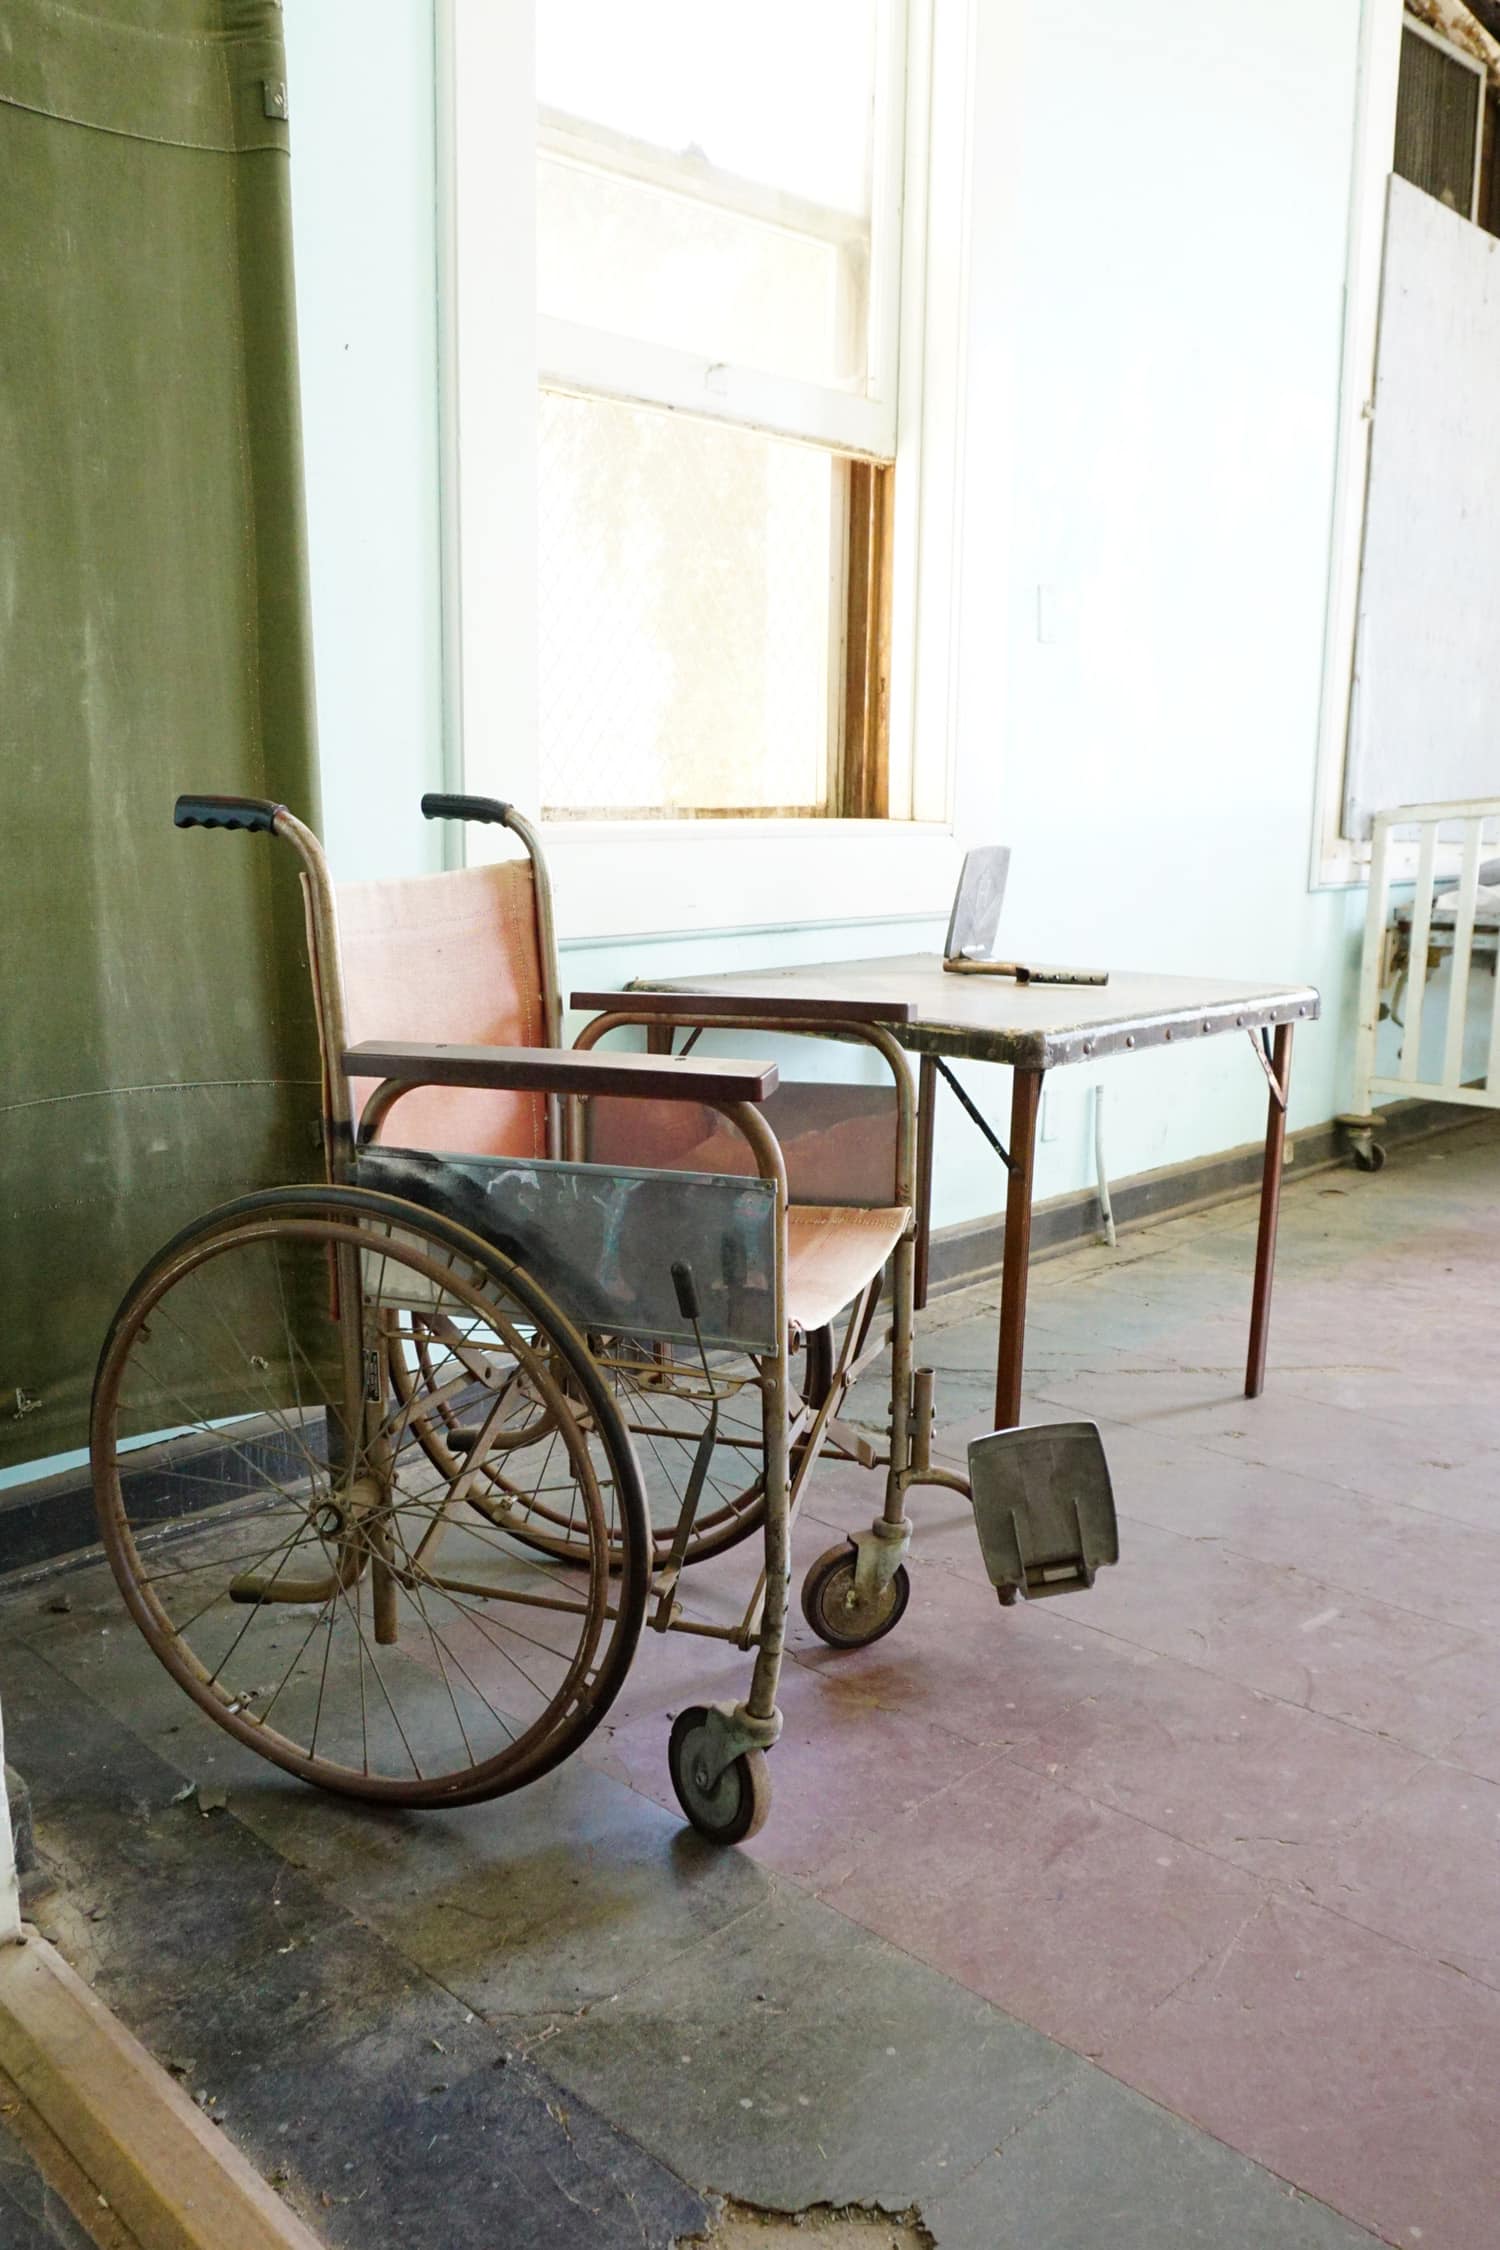 Vintage wheelchair in dusty and dirty old infirmary room 